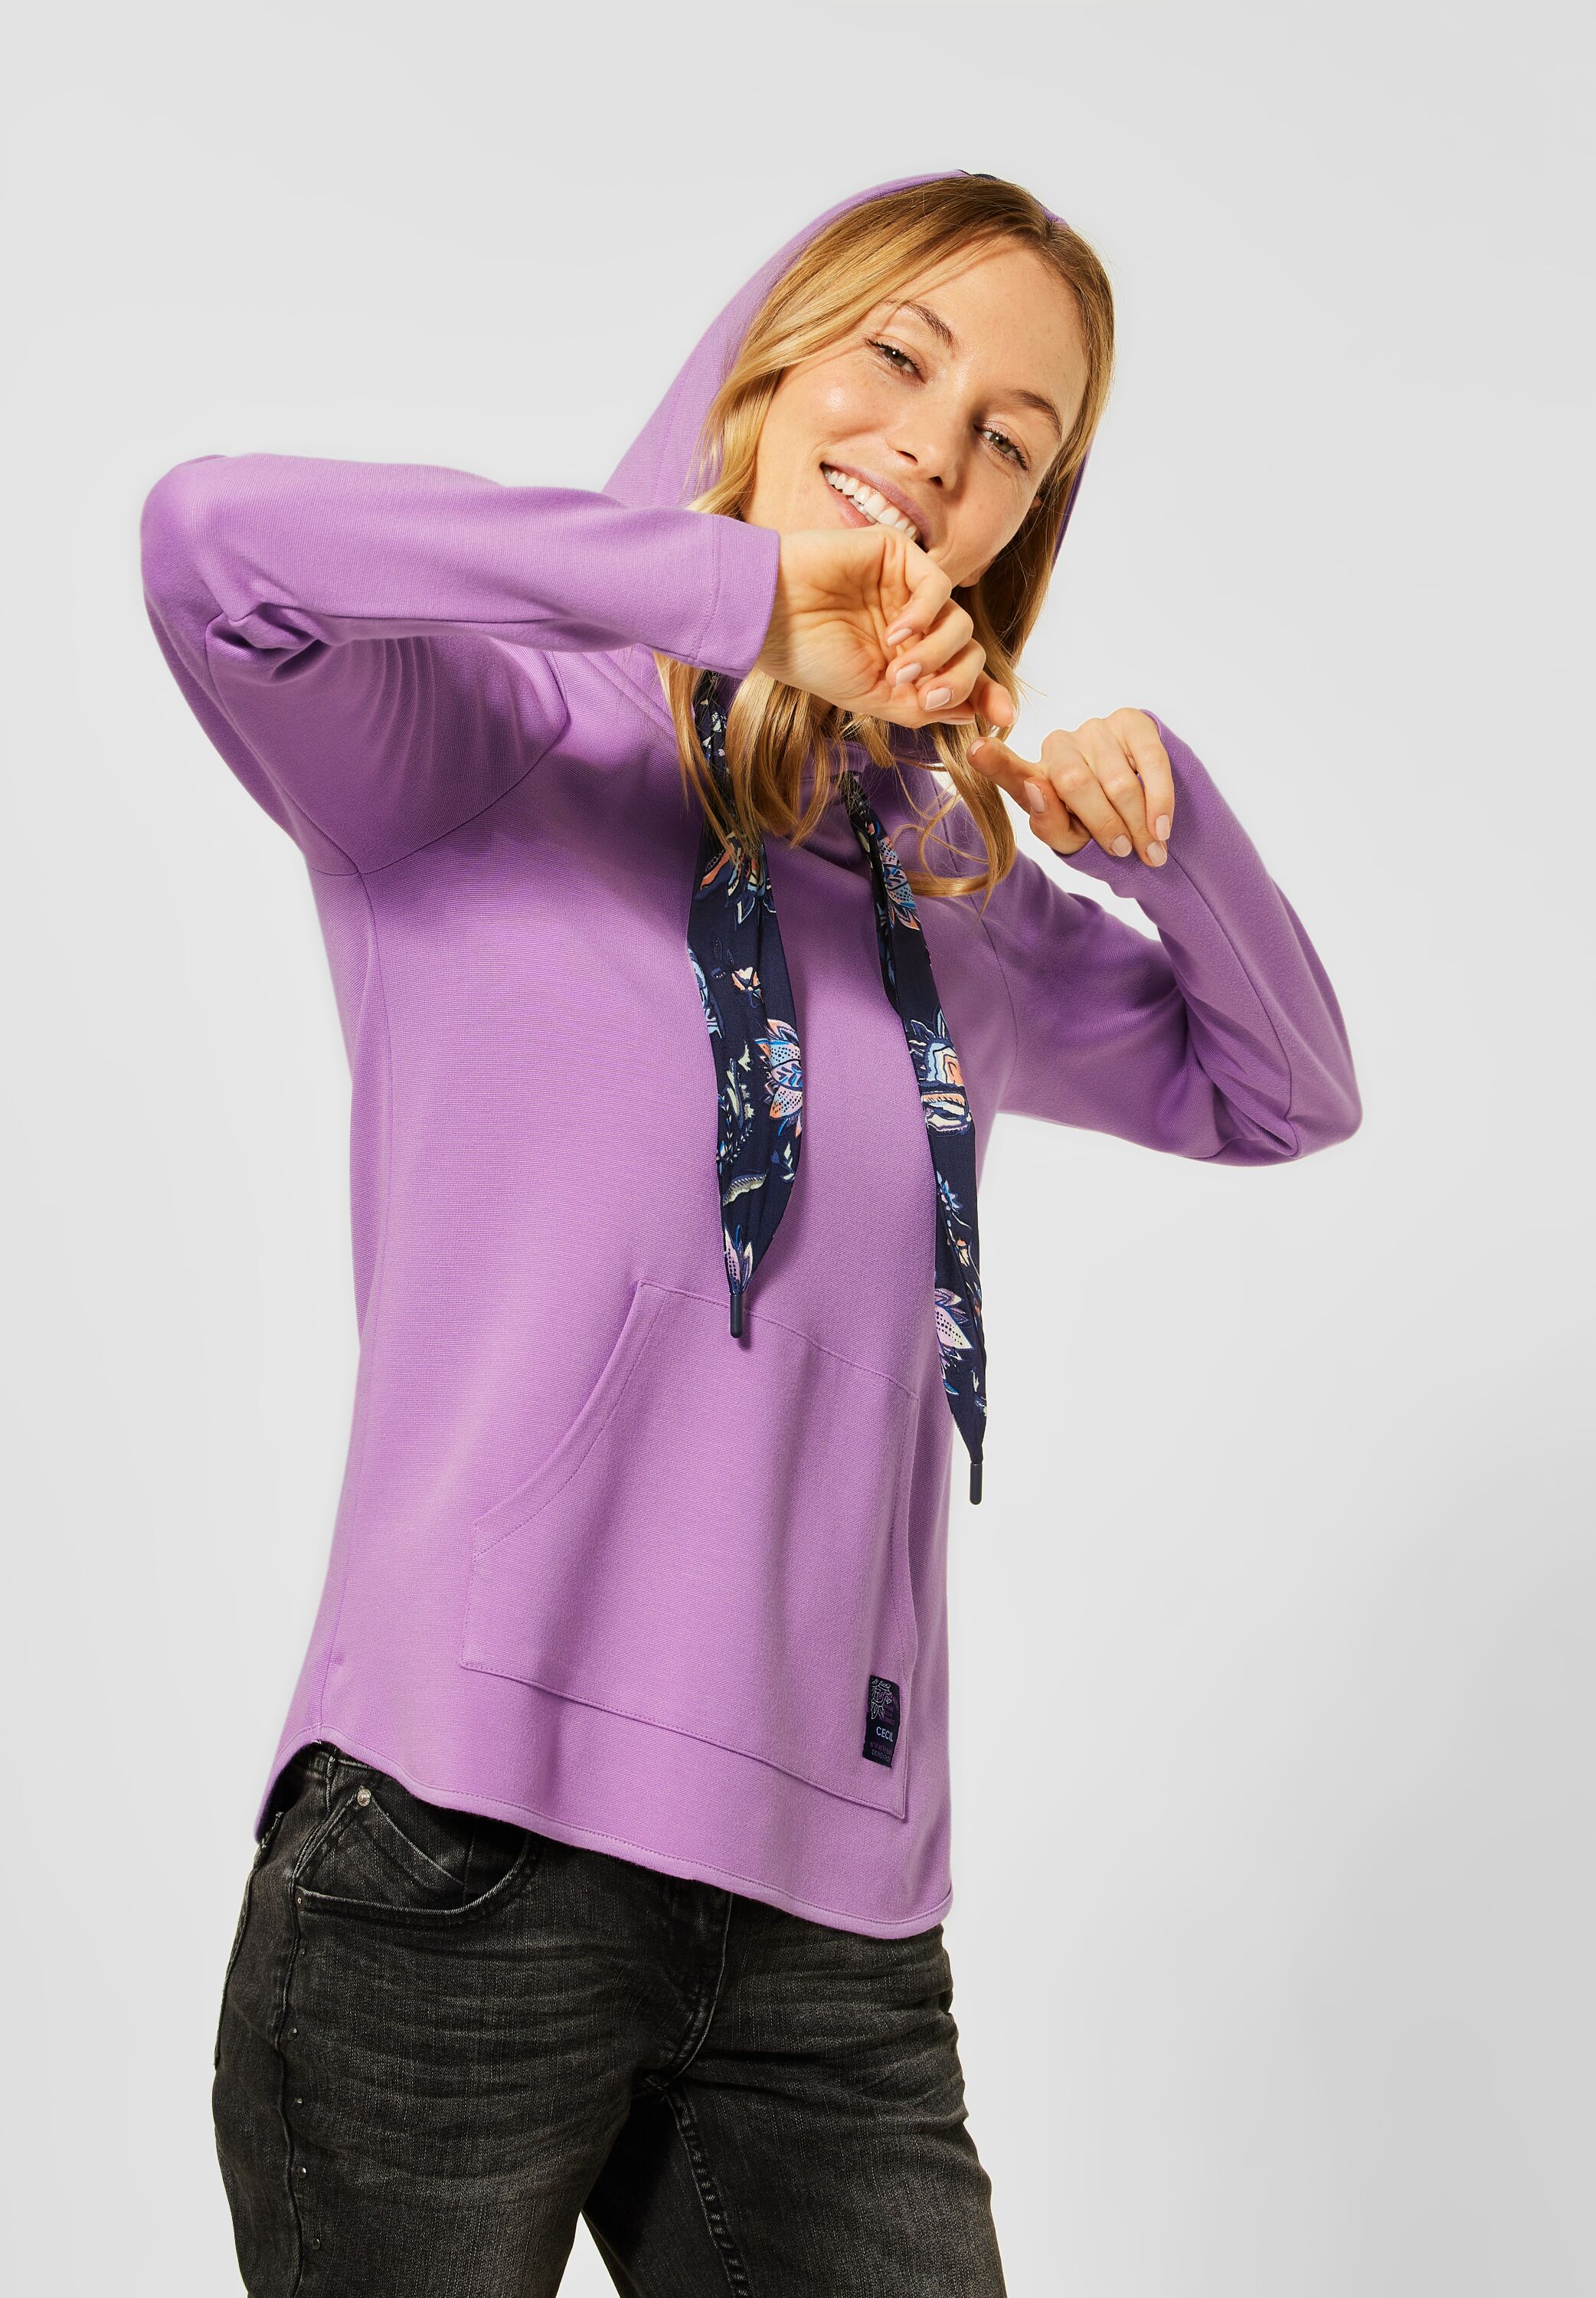 CECIL Shirt in Soft Violet B315803-12746 - CONCEPT Mode